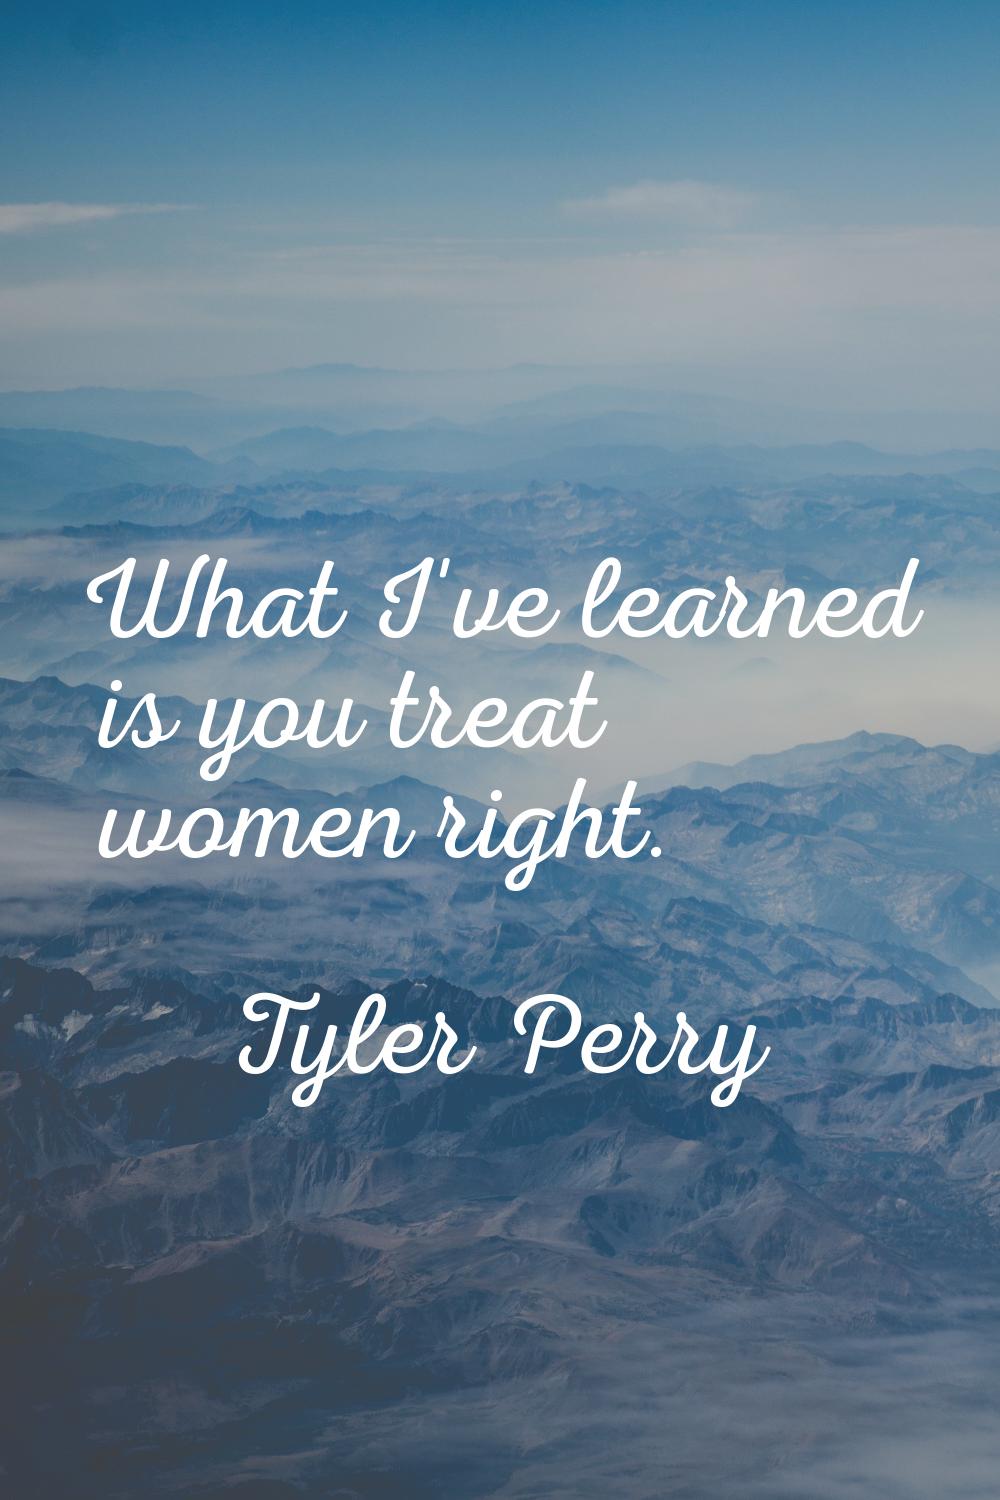 What I've learned is you treat women right.